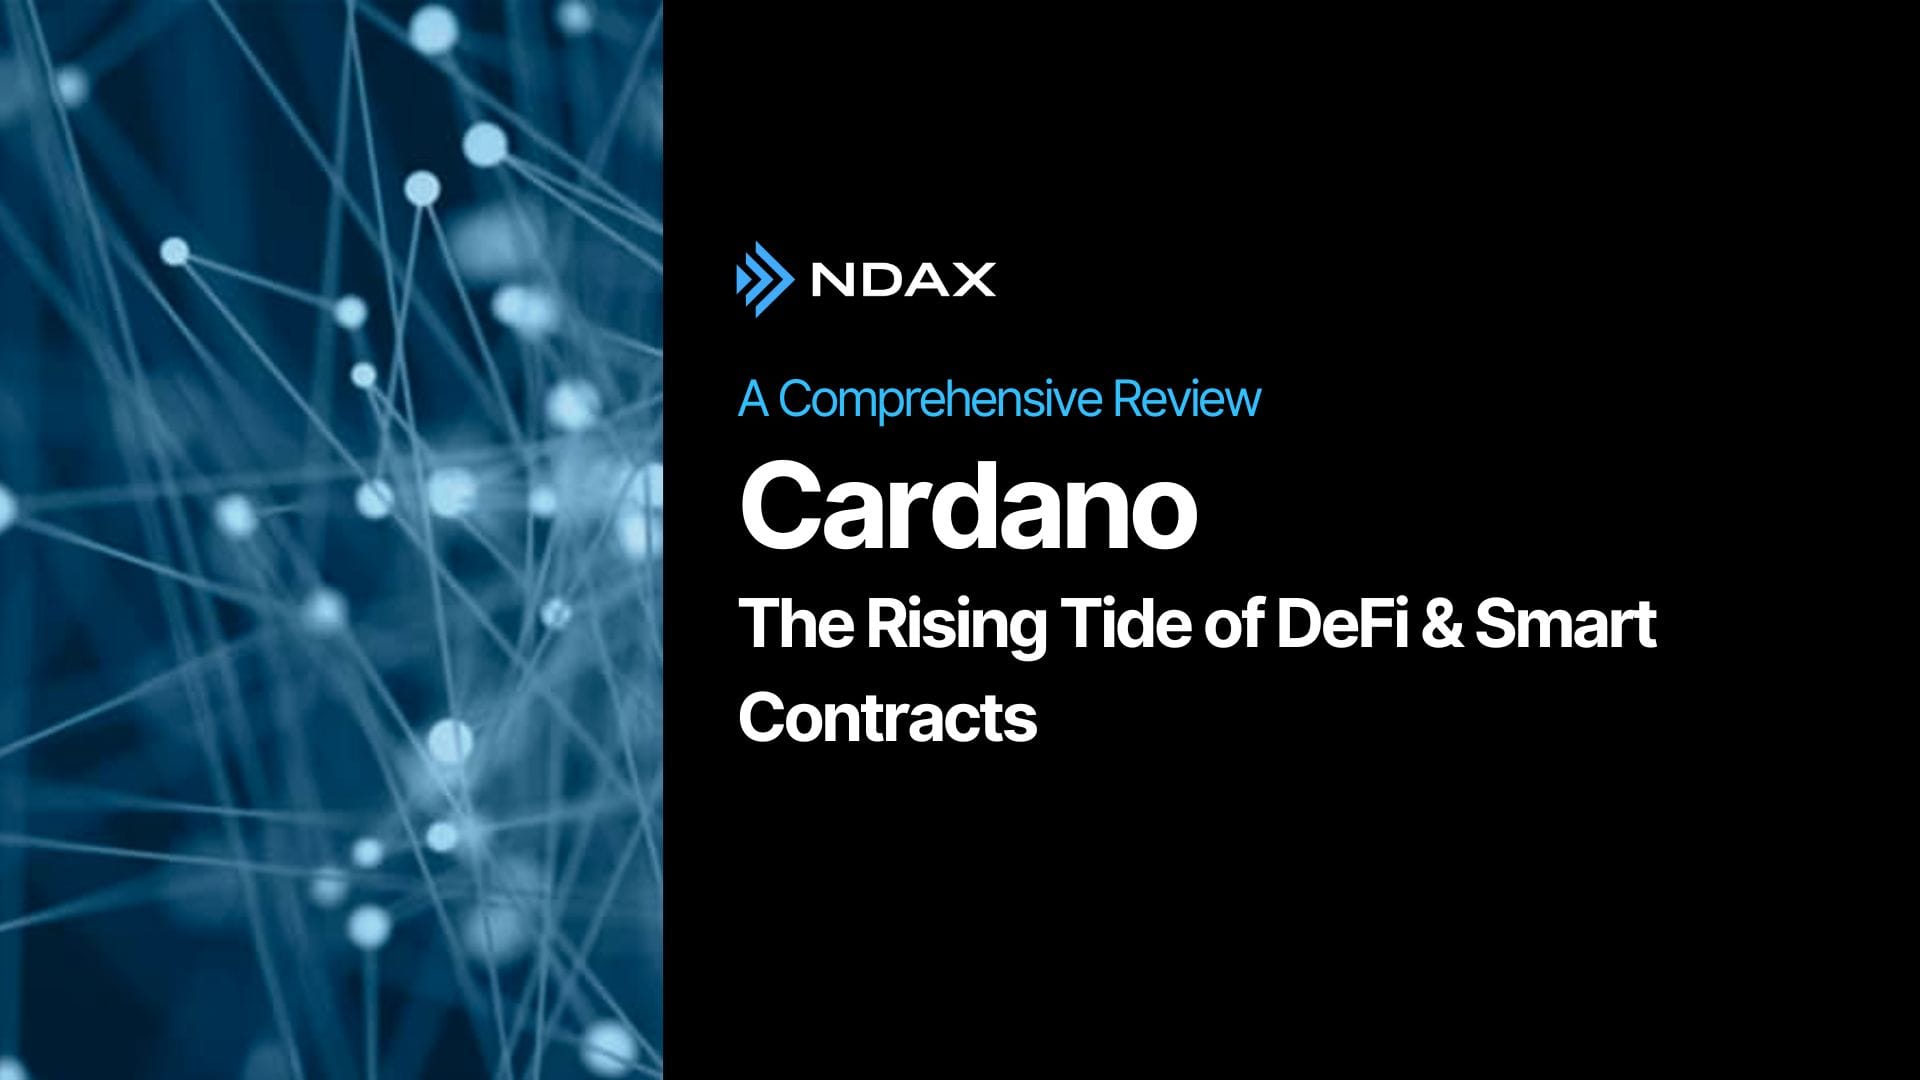 The Rising Tide of DeFi and Smart Contracts on Cardano: A Comprehensive Review